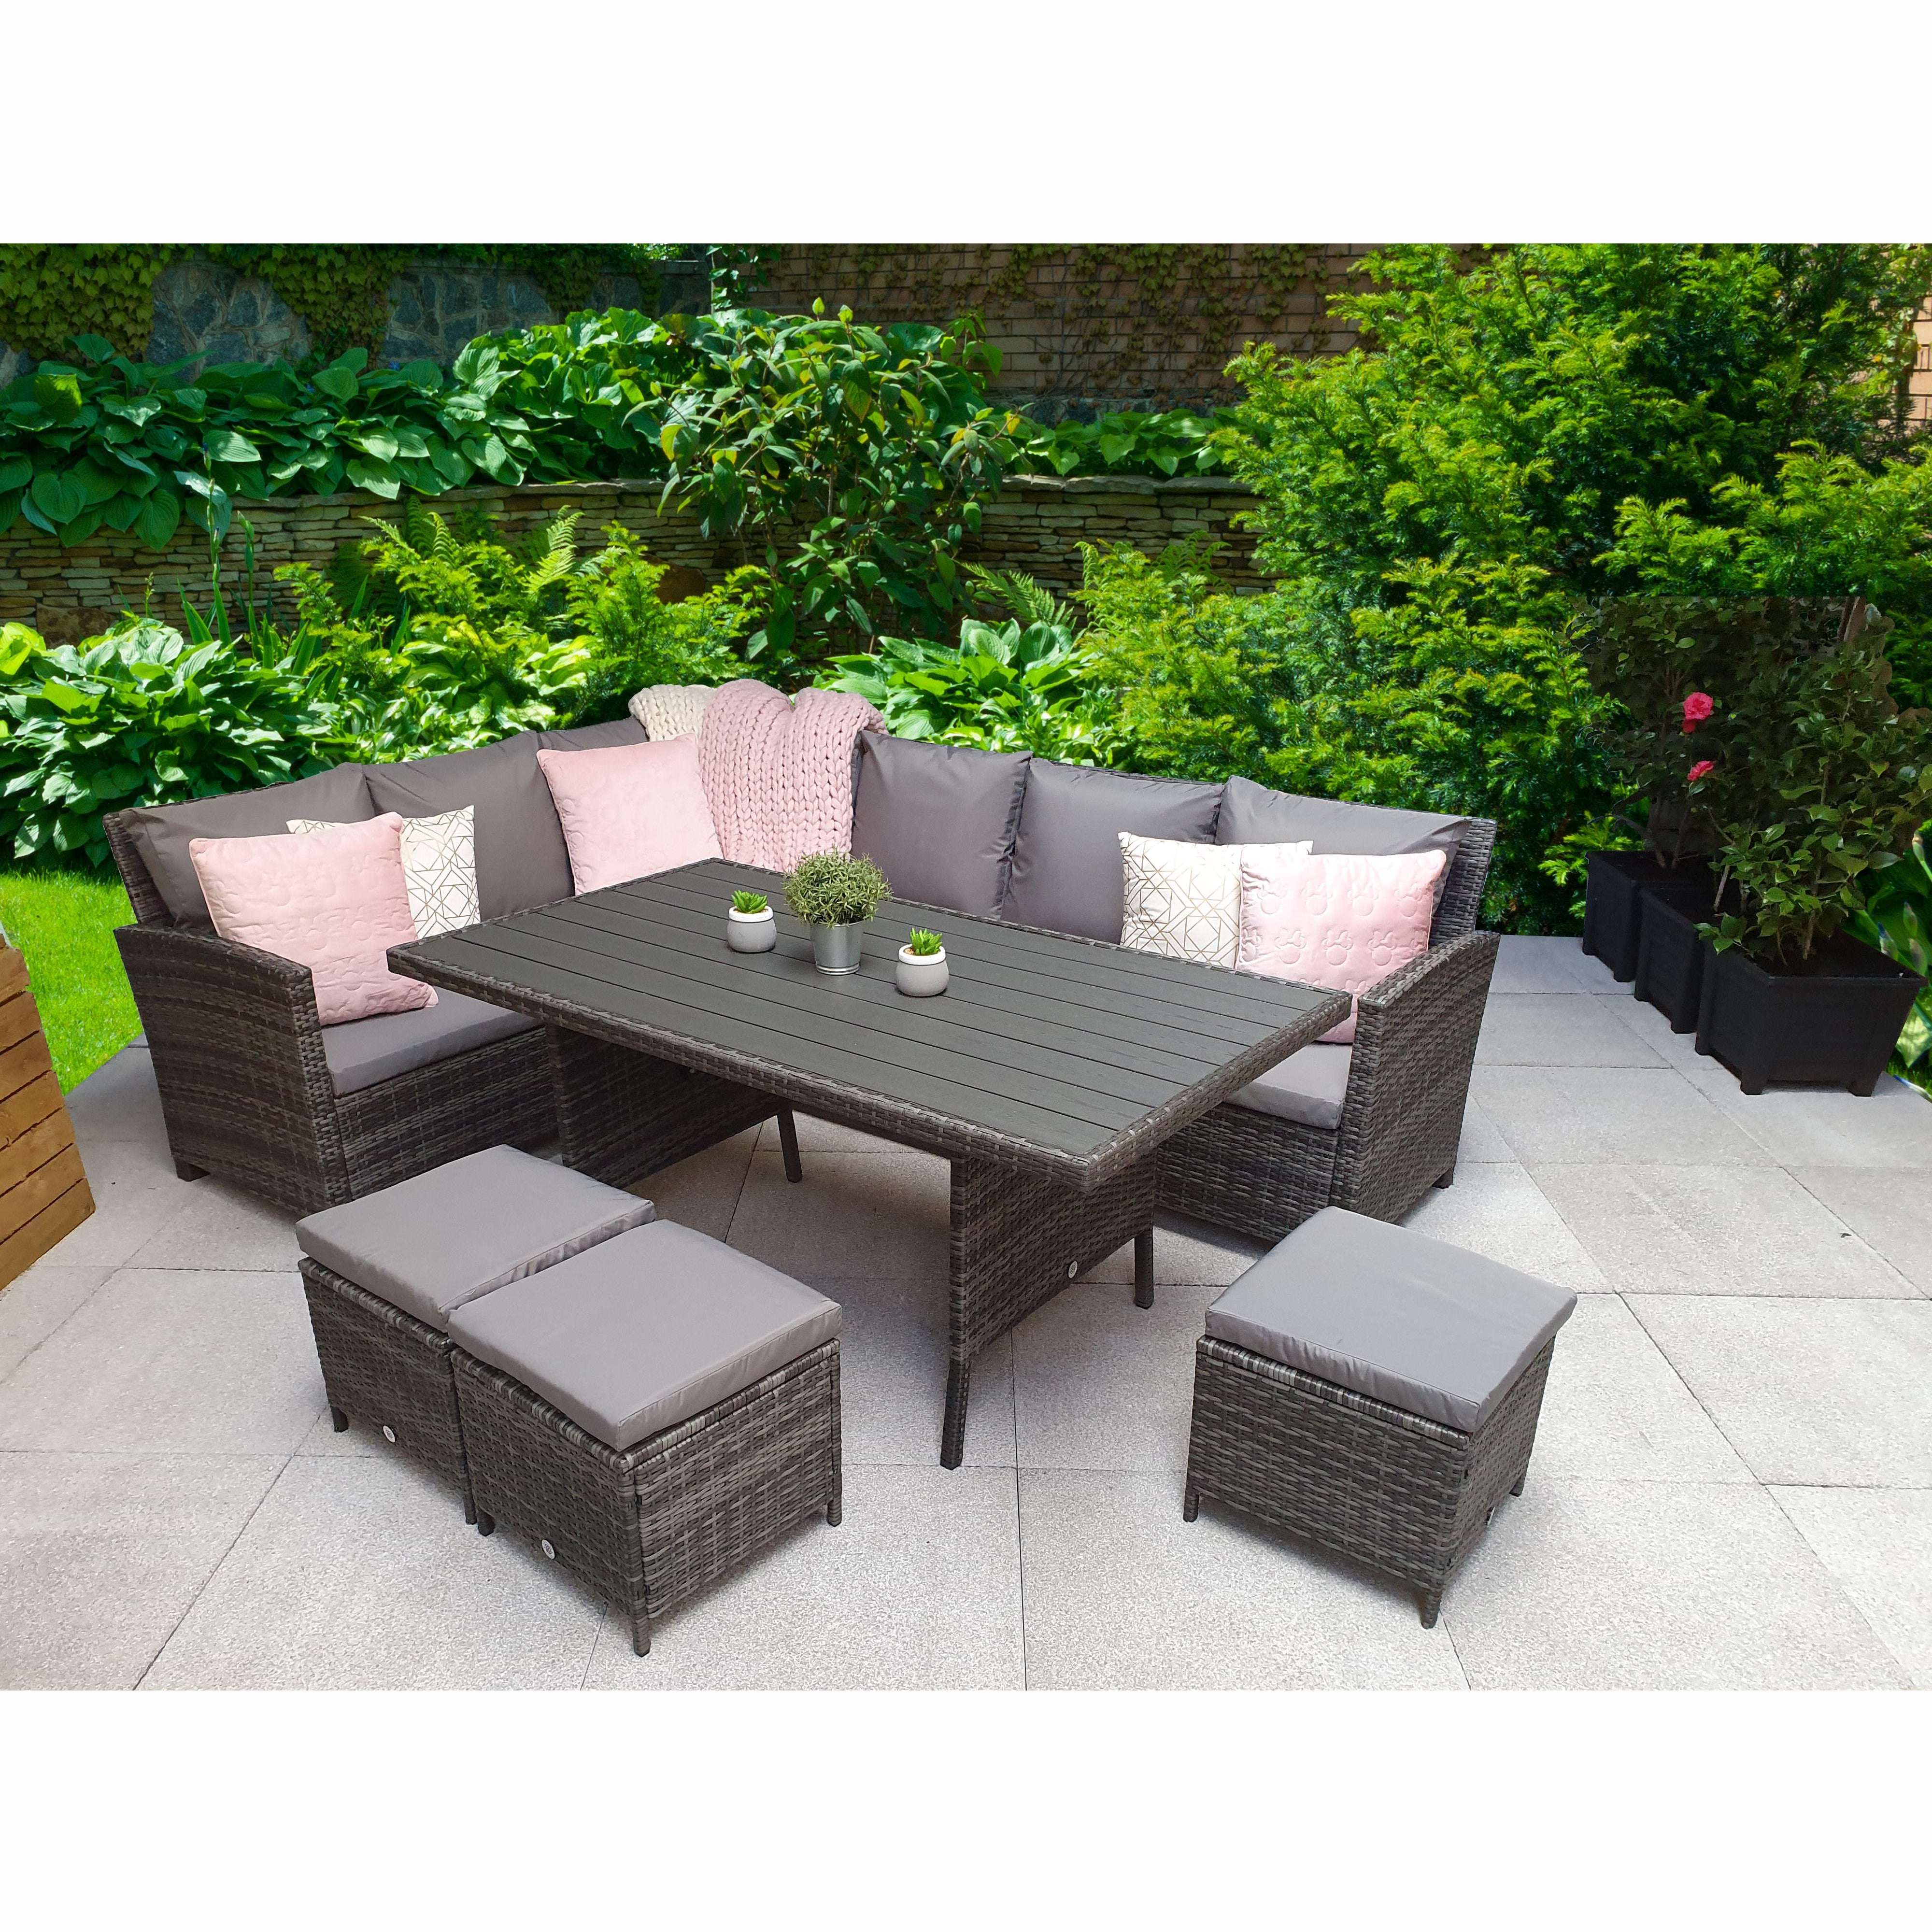 Exceptional Garden:Signature Weave Charlie Polywood Corner Dining Set